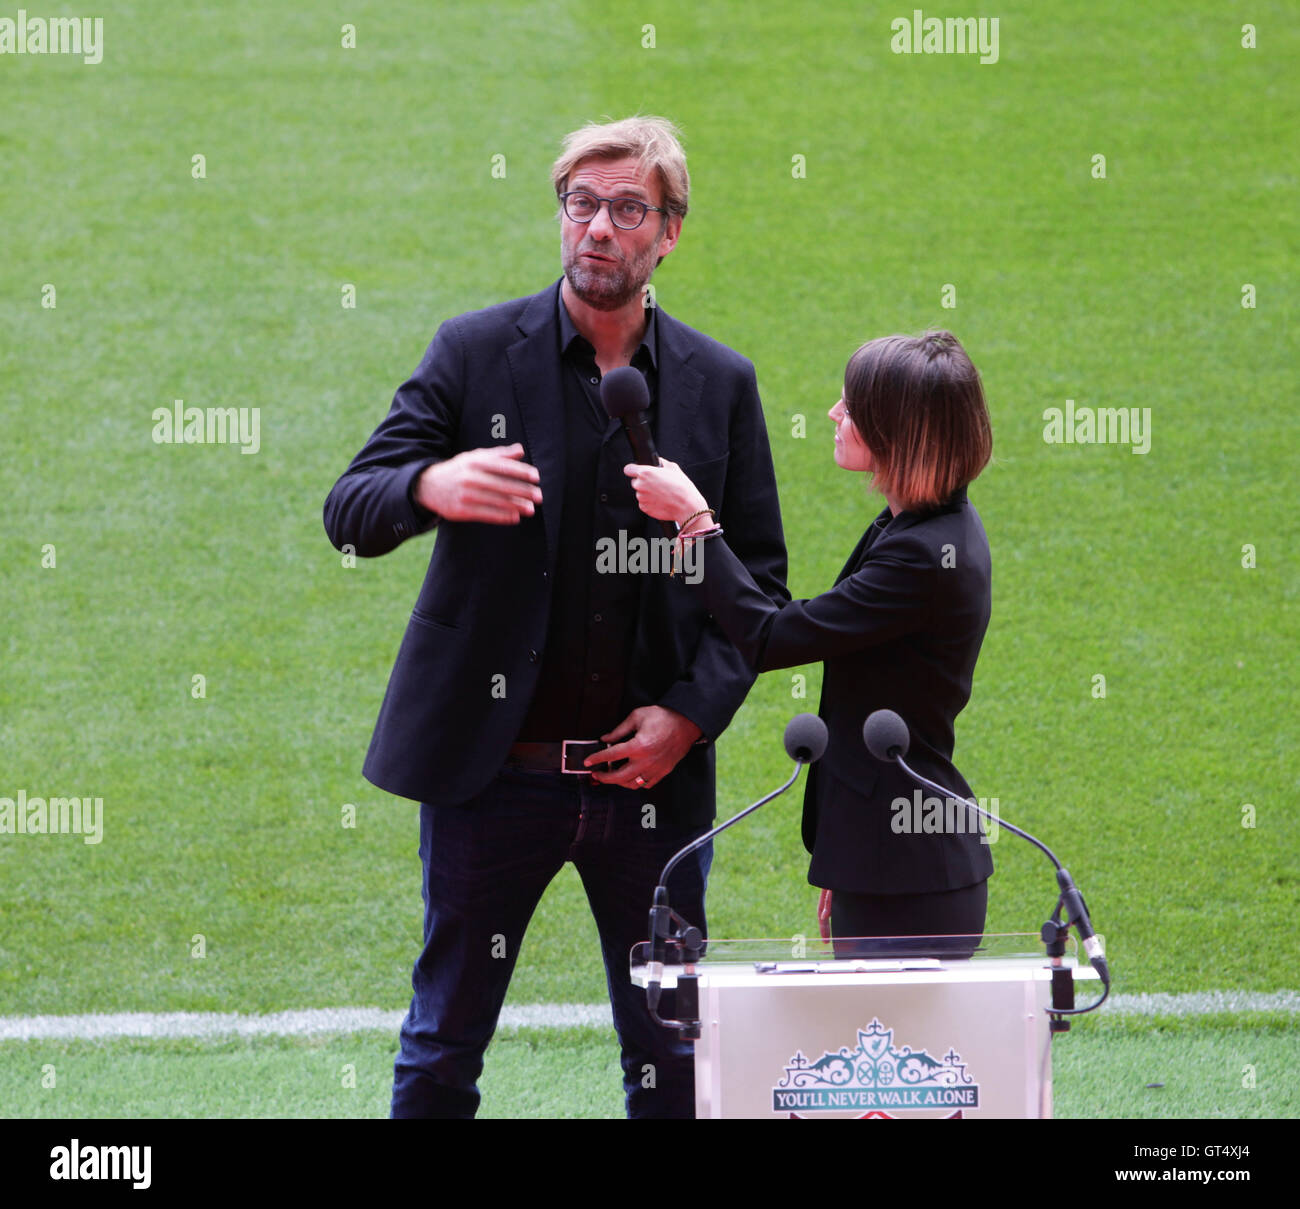 Anfield, Liverpool, UK. 09th Sep, 2016. Official Opening of Anfield's Main Stand. LFC TV presenter Claire Rourke interviews Liverpool FC manager Jurgen Klopp at this morning's official ceremony to mark the opening of the new Main Stand extension at Anfield. Liverpool play their first home match of the season versus Leicester City tomorrow, when the additional seating provided by the new stand will raise Anfield's capacity to 54,074. Credit:  Action Plus Sports/Alamy Live News Stock Photo